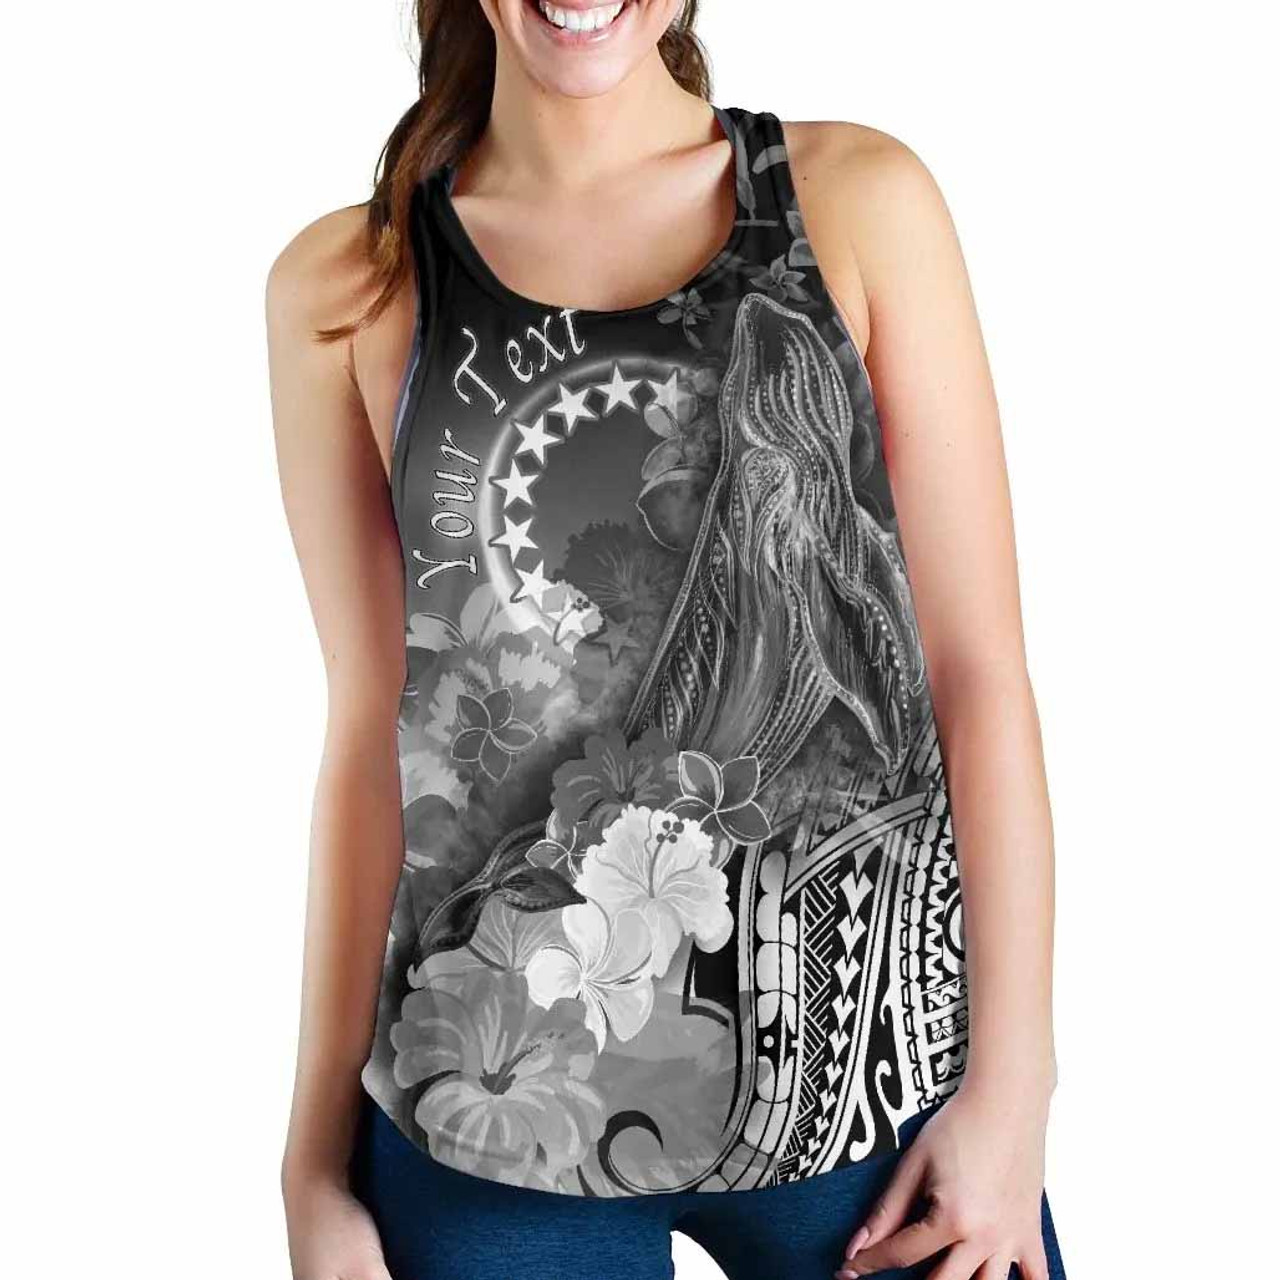 Cook Islands Custom Personalised Women Racerback Tank - Humpback Whale with Tropical Flowers (White) 2